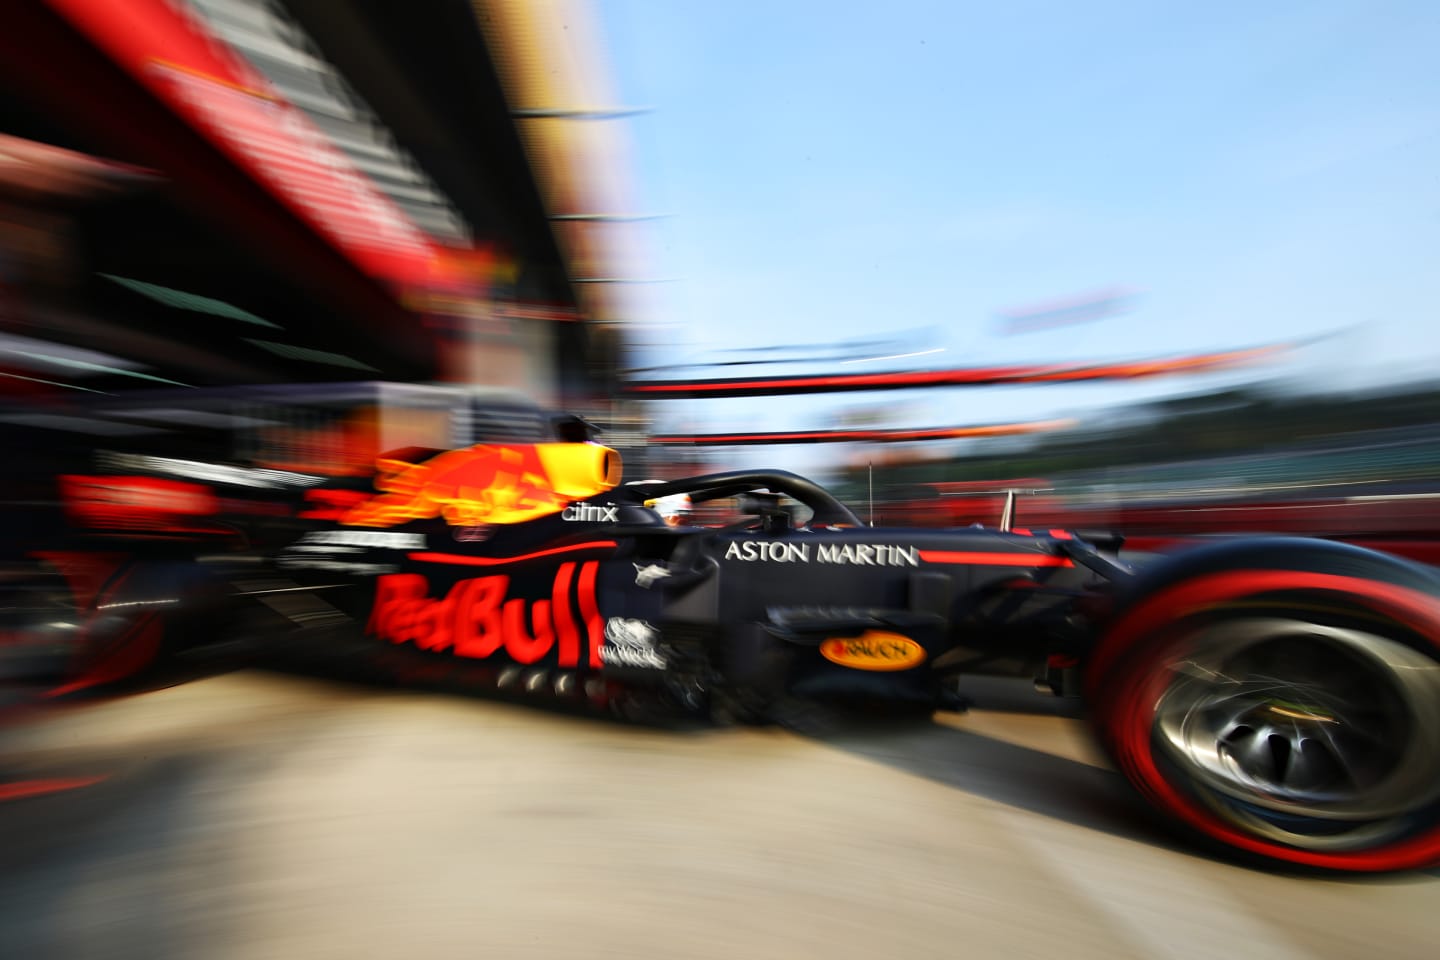 IMOLA, ITALY - OCTOBER 31: Max Verstappen of the Netherlands driving the (33) Aston Martin Red Bull